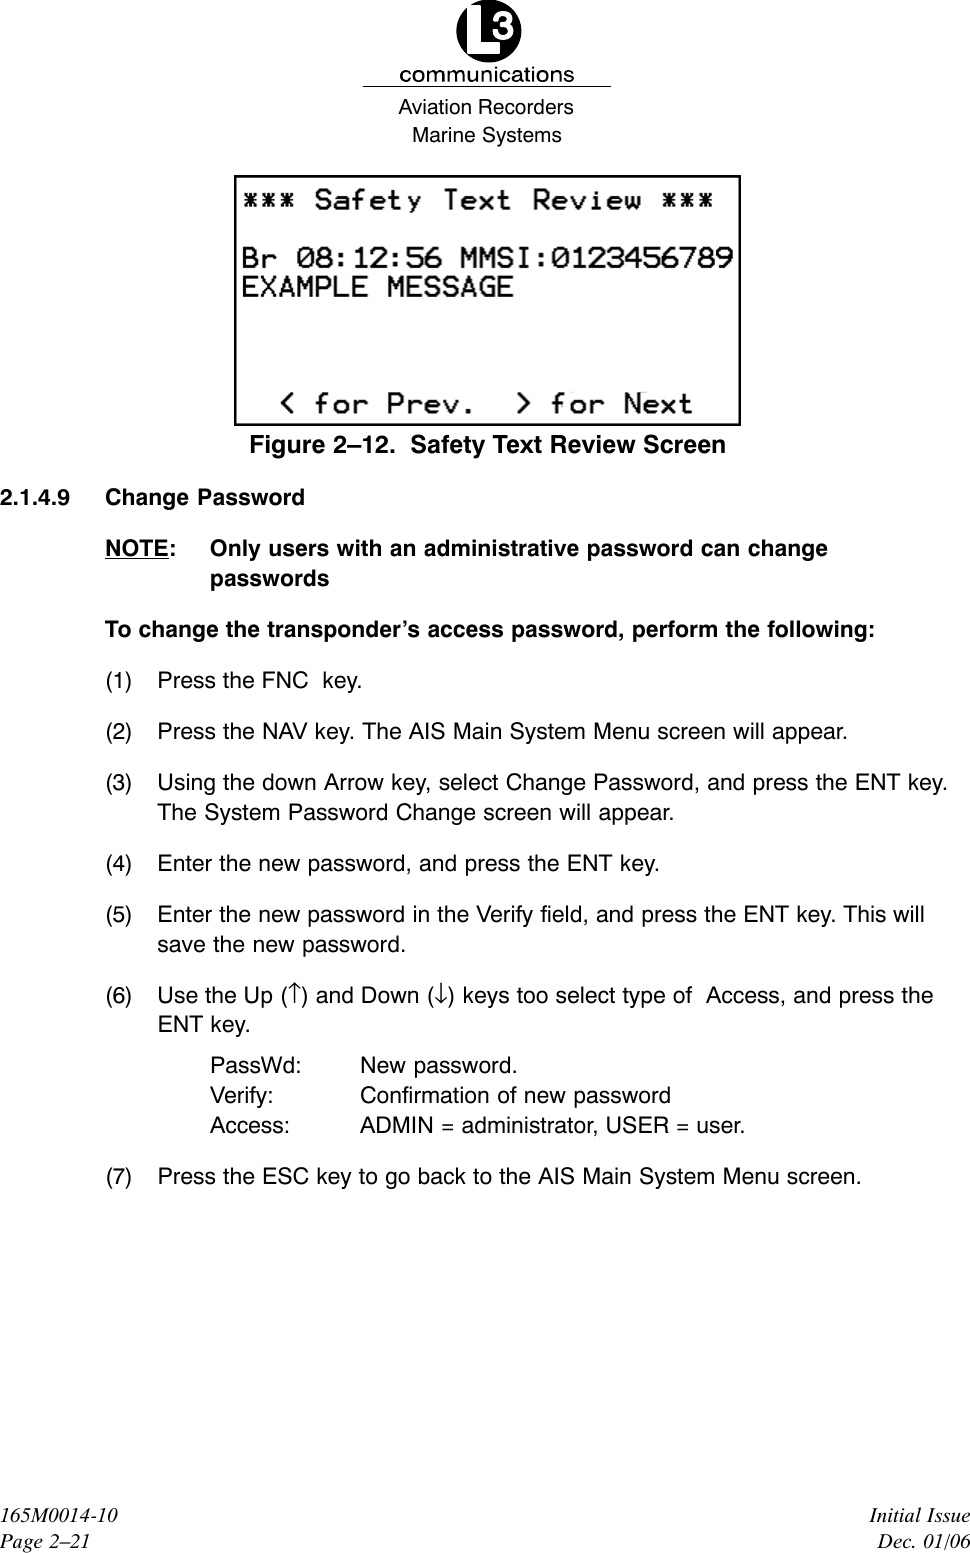 Marine SystemsAviation RecordersInitial IssueDec. 01/06165M0014-10Page 2–21Figure 2–12.  Safety Text Review Screen2.1.4.9 Change PasswordNOTE: Only users with an administrative password can changepasswordsTo change the transponder’s access password, perform the following:(1) Press the FNC  key.(2) Press the NAV key. The AIS Main System Menu screen will appear.(3) Using the down Arrow key, select Change Password, and press the ENT key.The System Password Change screen will appear.(4) Enter the new password, and press the ENT key.(5) Enter the new password in the Verify field, and press the ENT key. This willsave the new password.(6) Use the Up (↑) and Down (↓) keys too select type of  Access, and press theENT key.PassWd: New password.Verify: Confirmation of new passwordAccess: ADMIN = administrator, USER = user.(7) Press the ESC key to go back to the AIS Main System Menu screen.